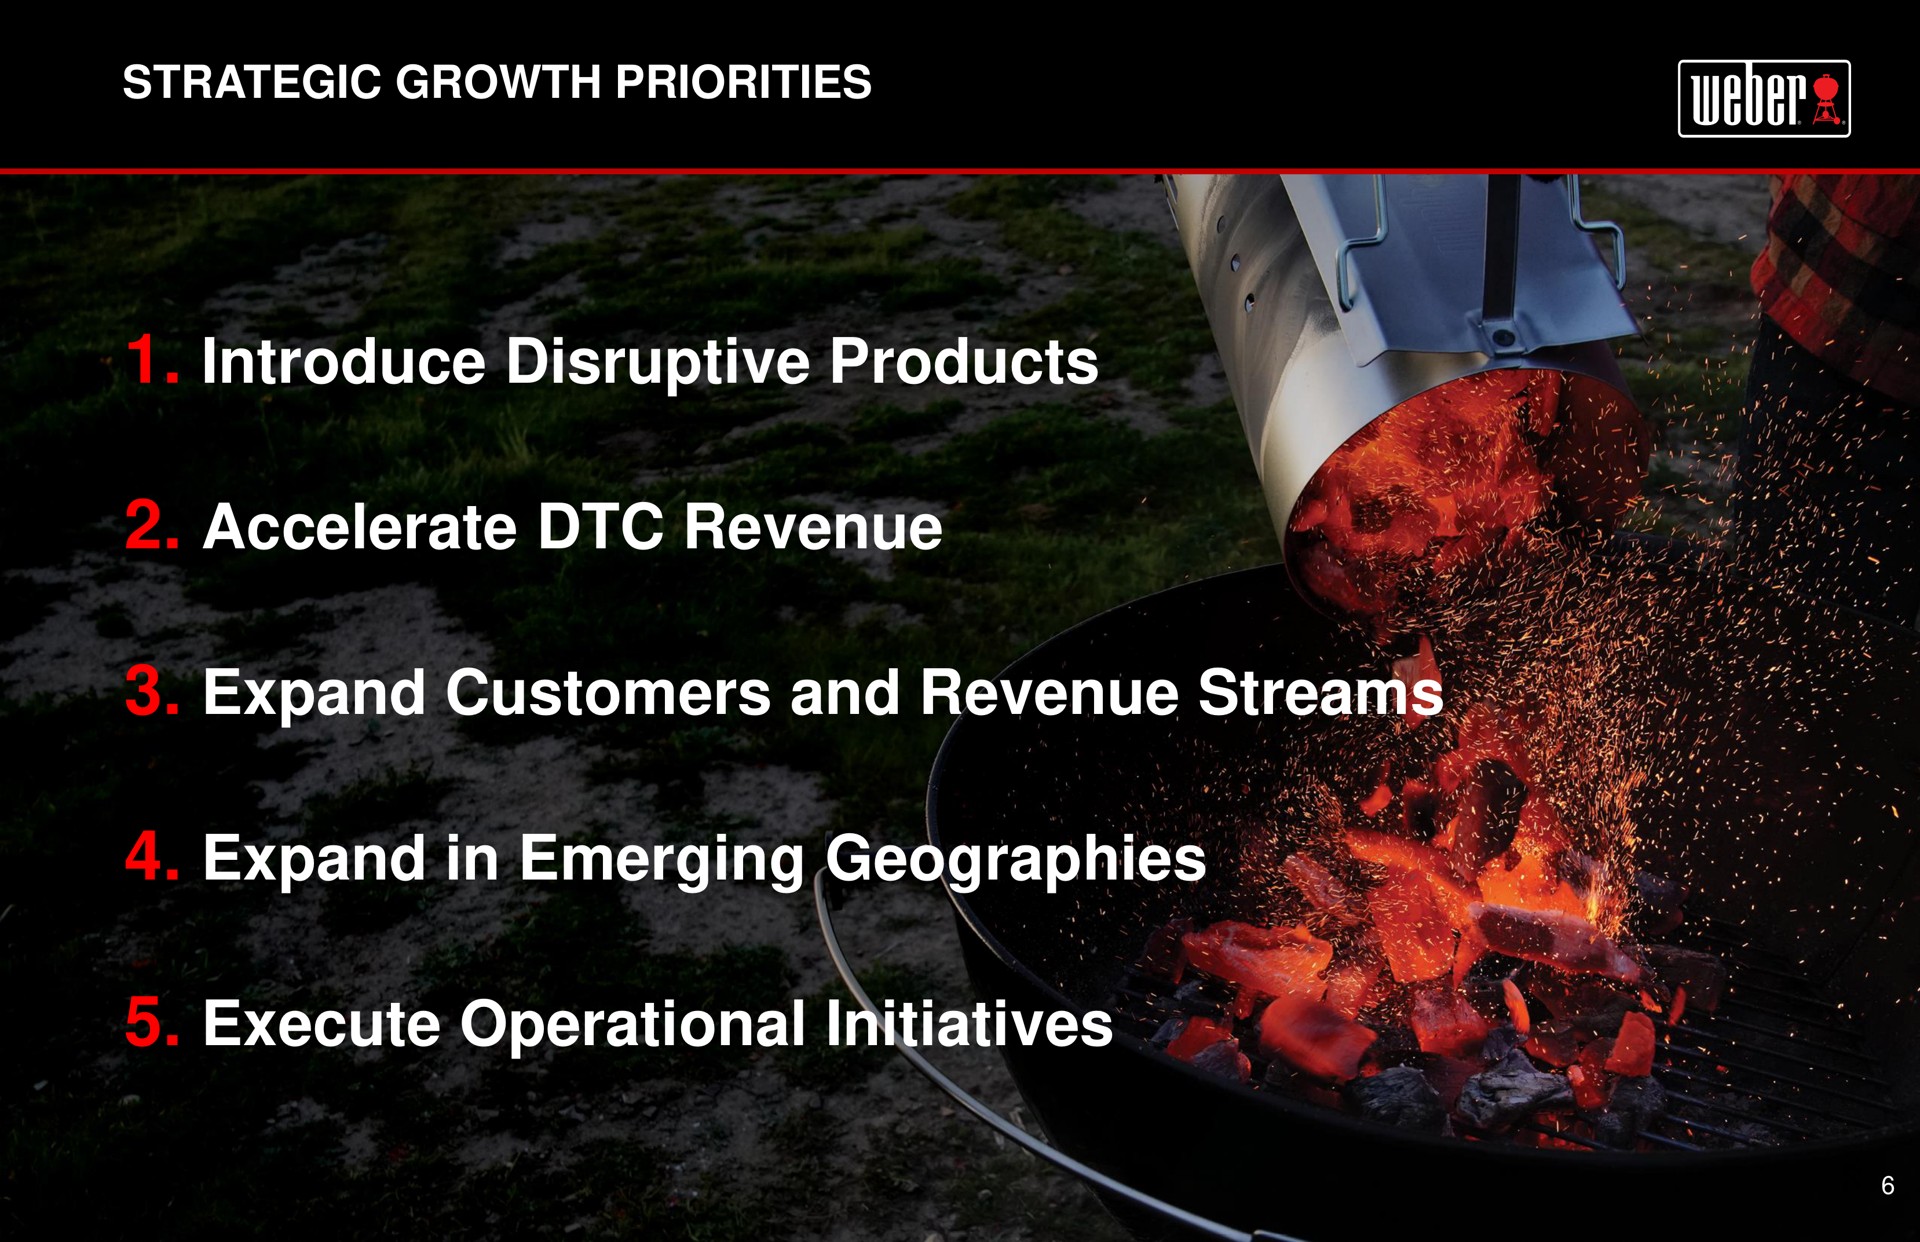 strategic growth priorities introduce disruptive products accelerate revenue expand customers and revenue streams expand in emerging geographies execute operational initiatives | Weber